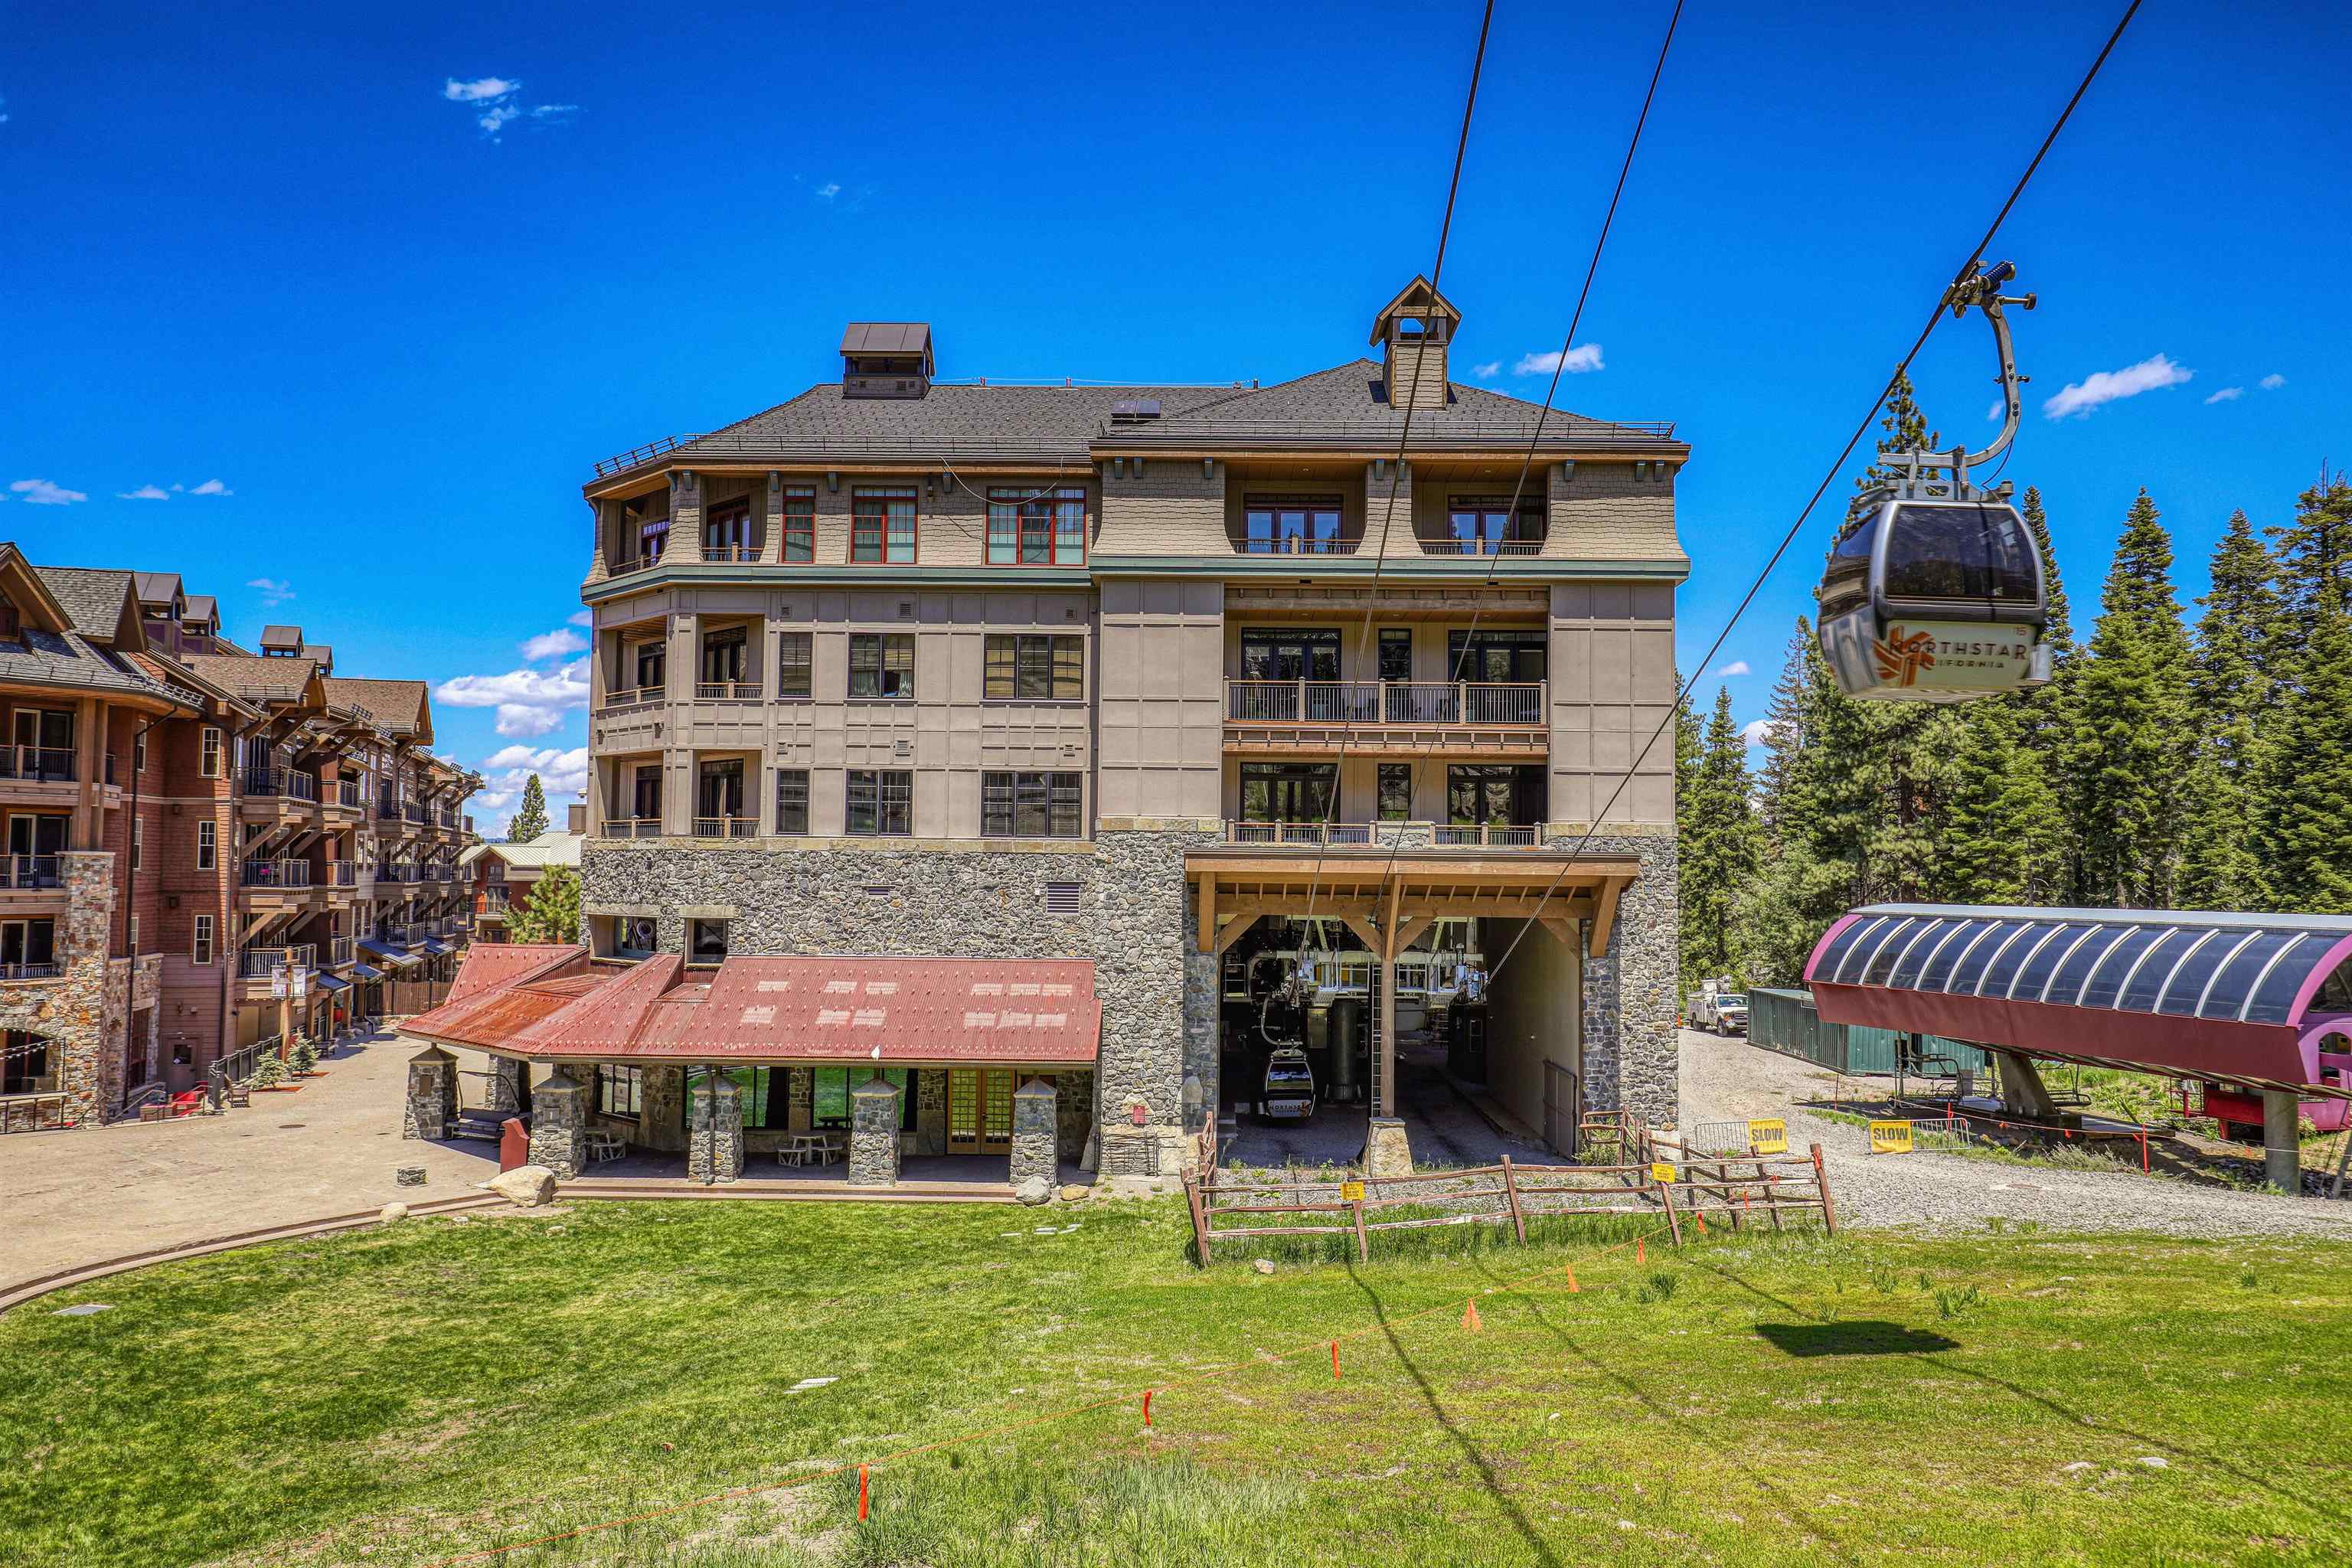 Image for 9001 Northstar Drive, Truckee, CA 96161-4254